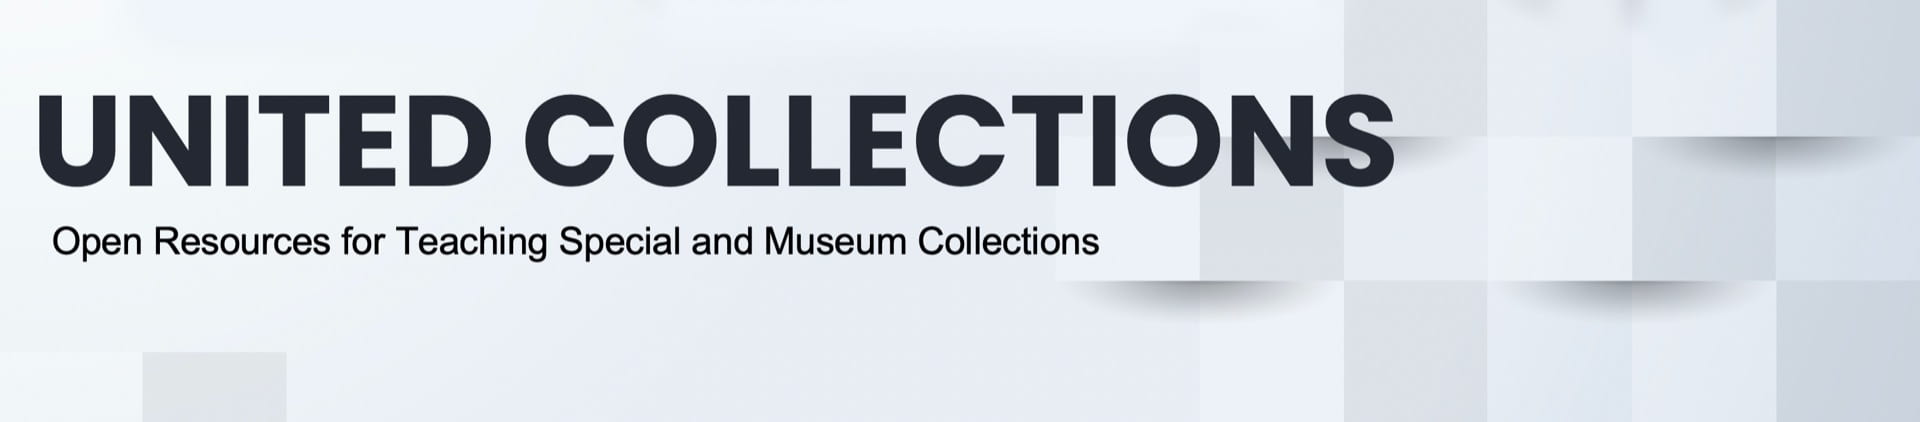 United Collections: Open Resources for Teaching Special and Museum Collections